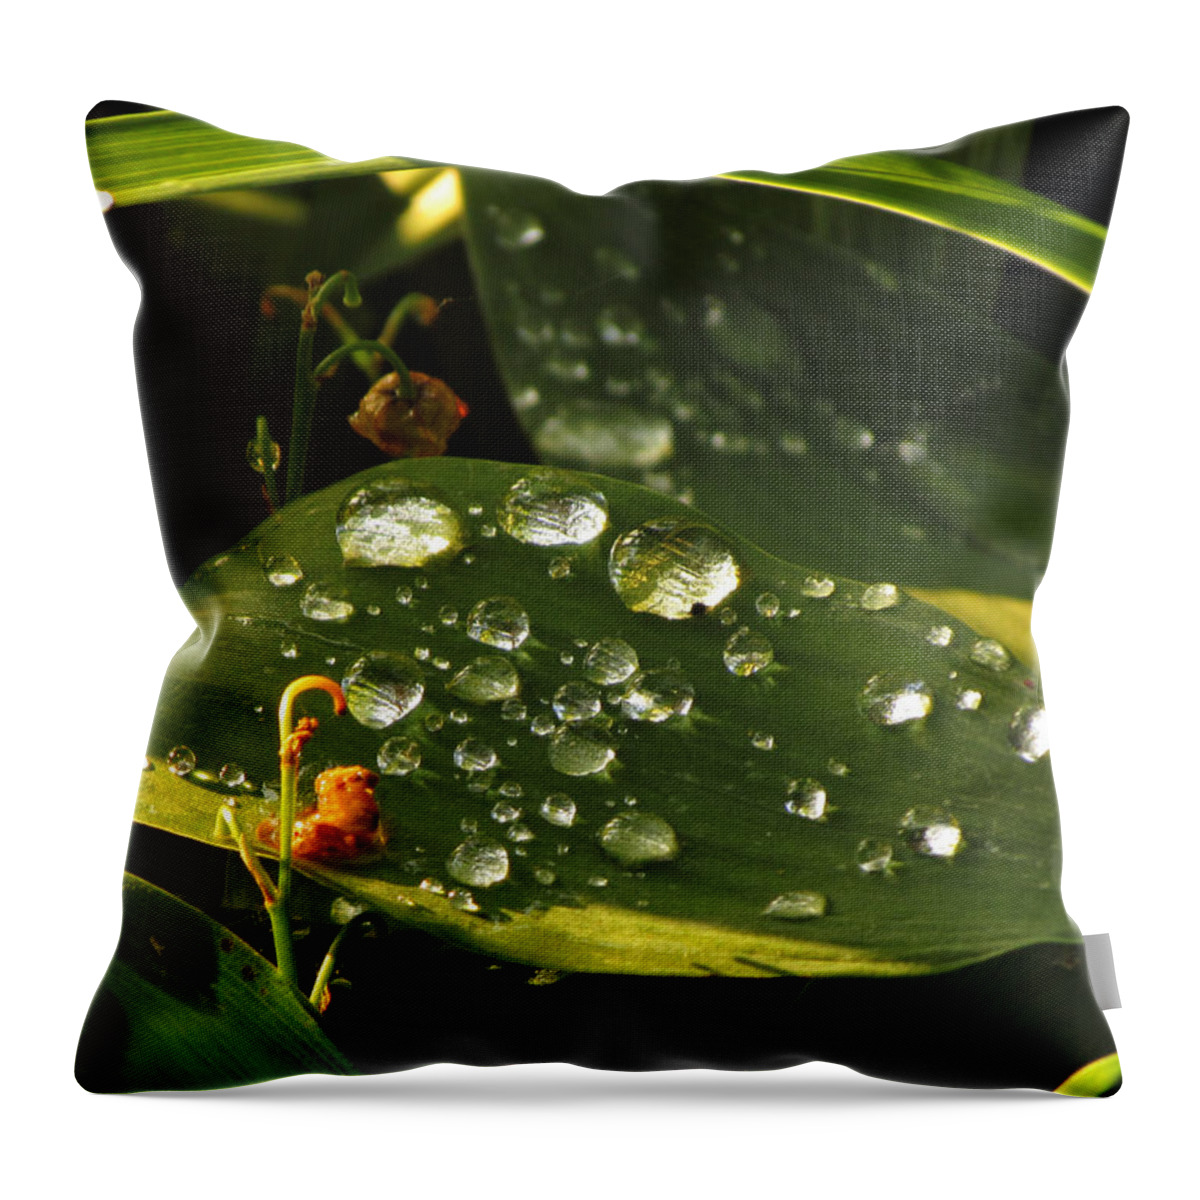 Water Throw Pillow featuring the photograph Water Droplets by David T Wilkinson